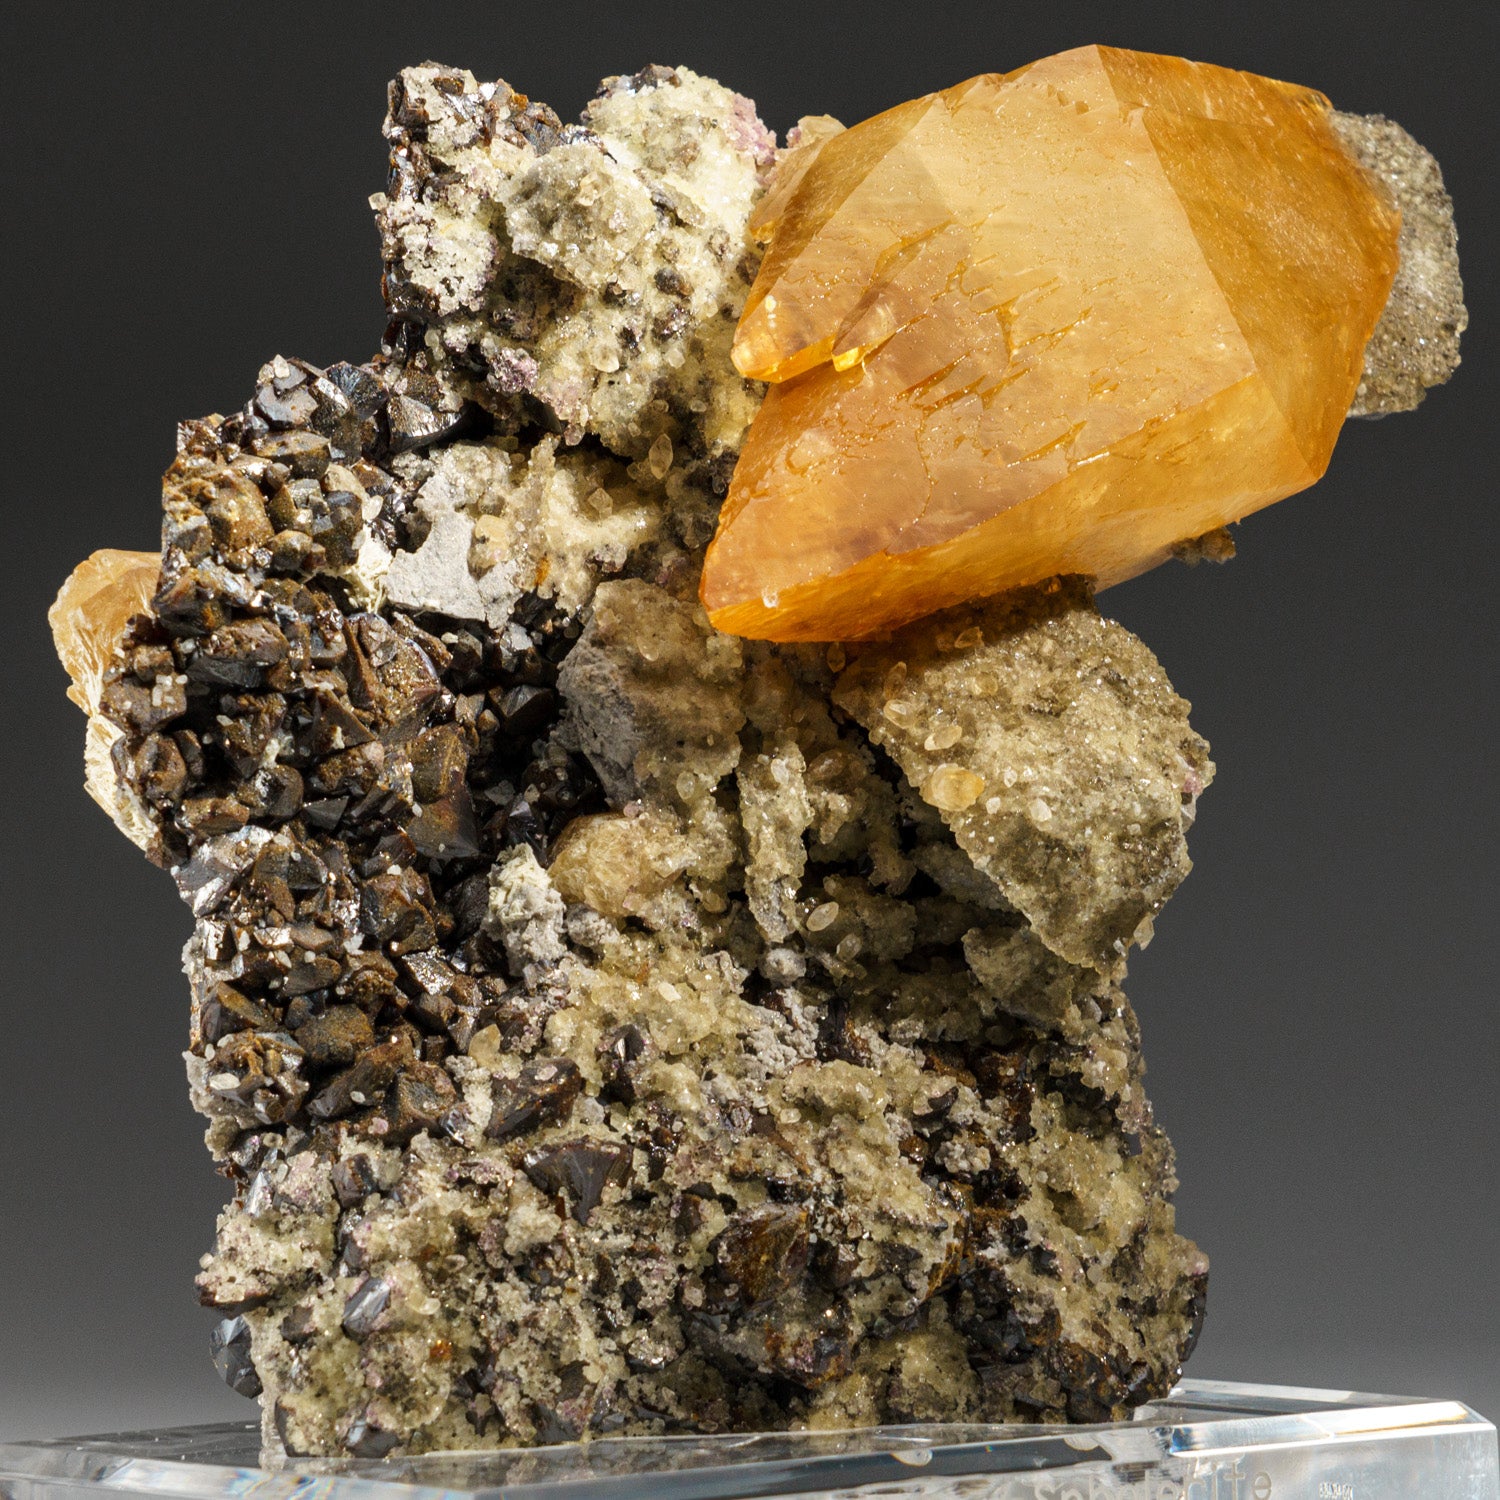 Golden Calcite with Sphalerite Crystal from Elmwood Mine, Tennessee (4 lbs)